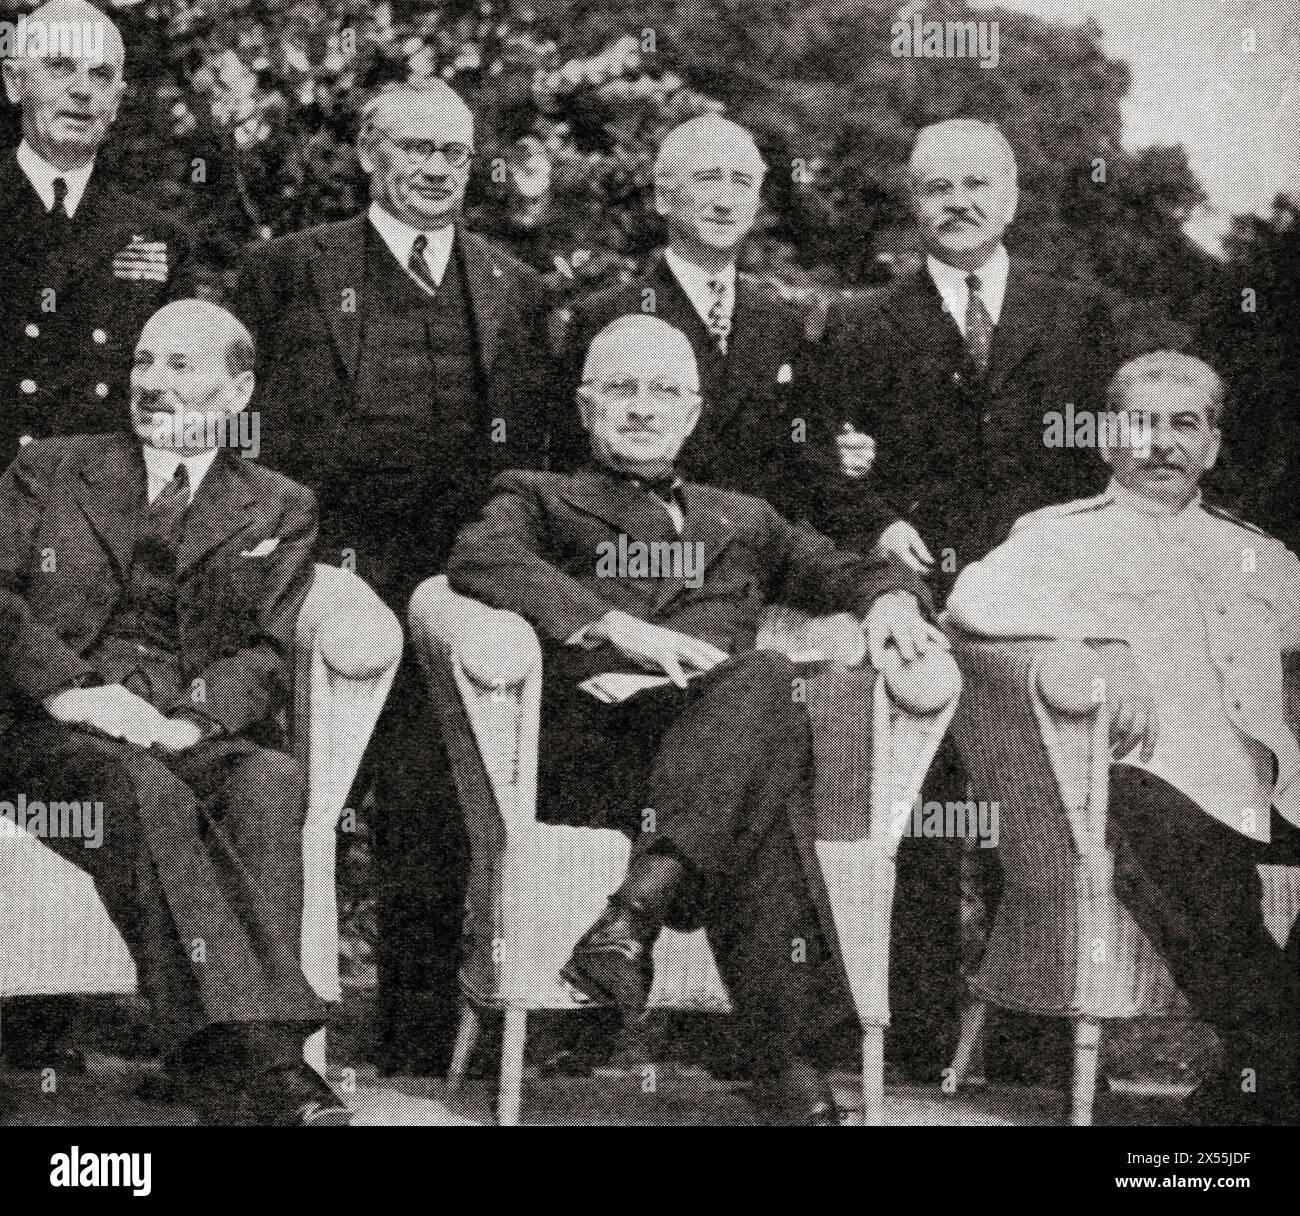 The Potsdam Conference, 1945. Front row from left to right: Mr Attlee, President Truman and Stalin. Back row from left to right: Admiral Leahy, Mr. Ernest Bevin, Mr J Byrnes and M Molotov.  Clement Richard Attlee, 1st Earl Attlee, 1883 – 1967. British statesman and Labour Party politician, Prime Minister of the United Kingdom.  Harry S. Truman, 1884 – 1972. 33rd president of the United States of America.  Joseph Vissarionovich Stalin, 1878 –  1953.  Soviet revolutionary and politician, leader of the Soviet Union and General Secretary of the Communist Party of the Soviet Union.  From Stock Photo